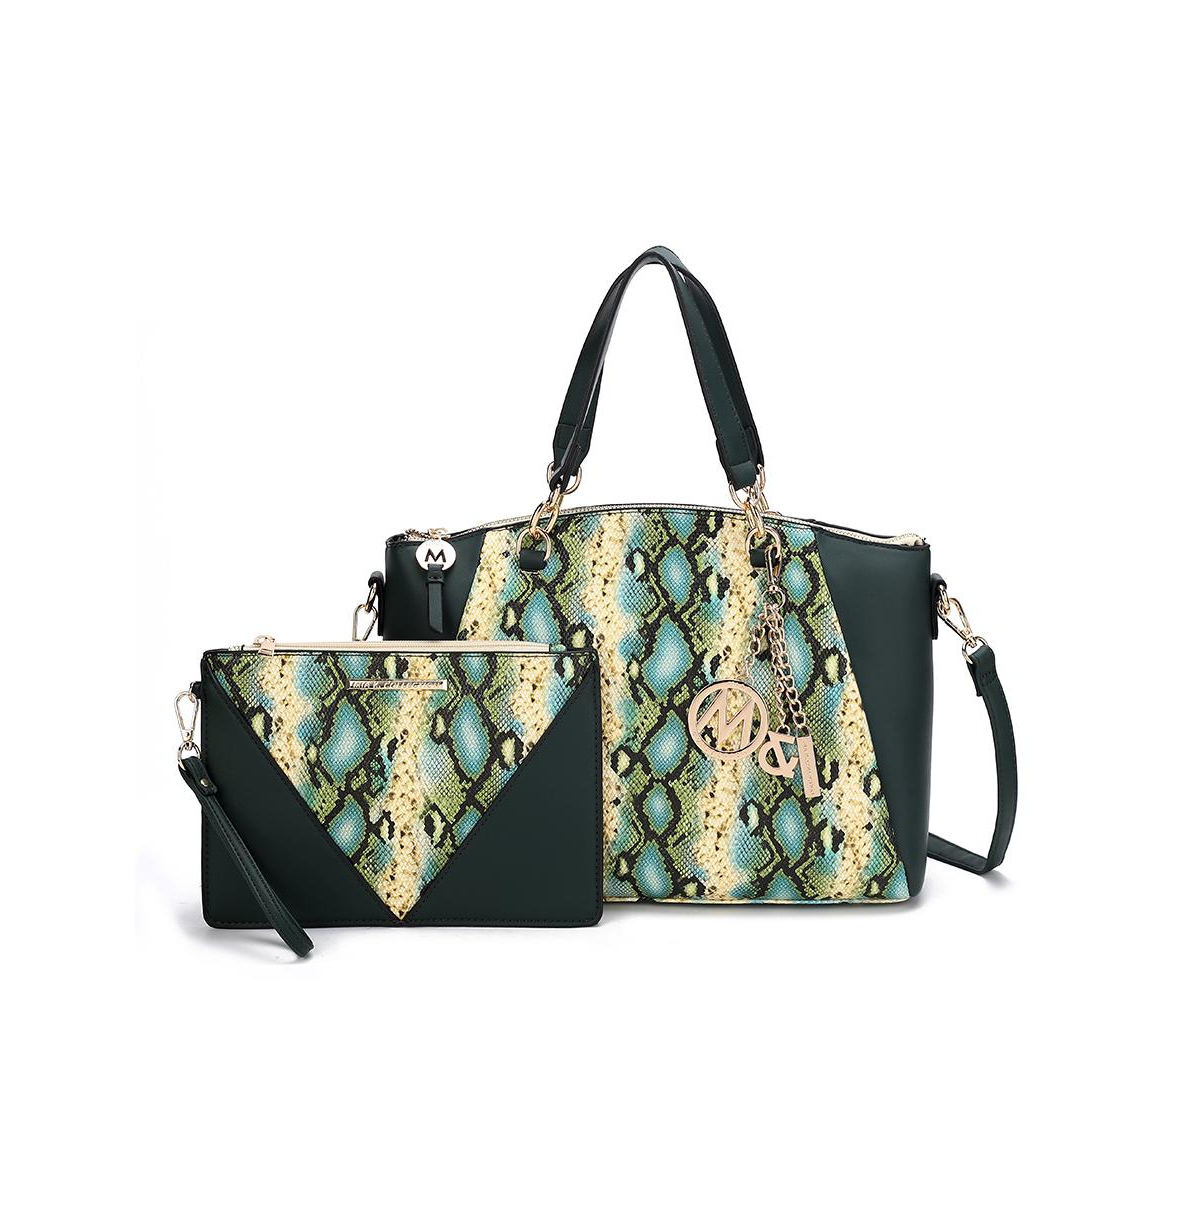 Addison Snake Embossed Tote Bag with matching Wristlet Pouch by Mia K - Navy